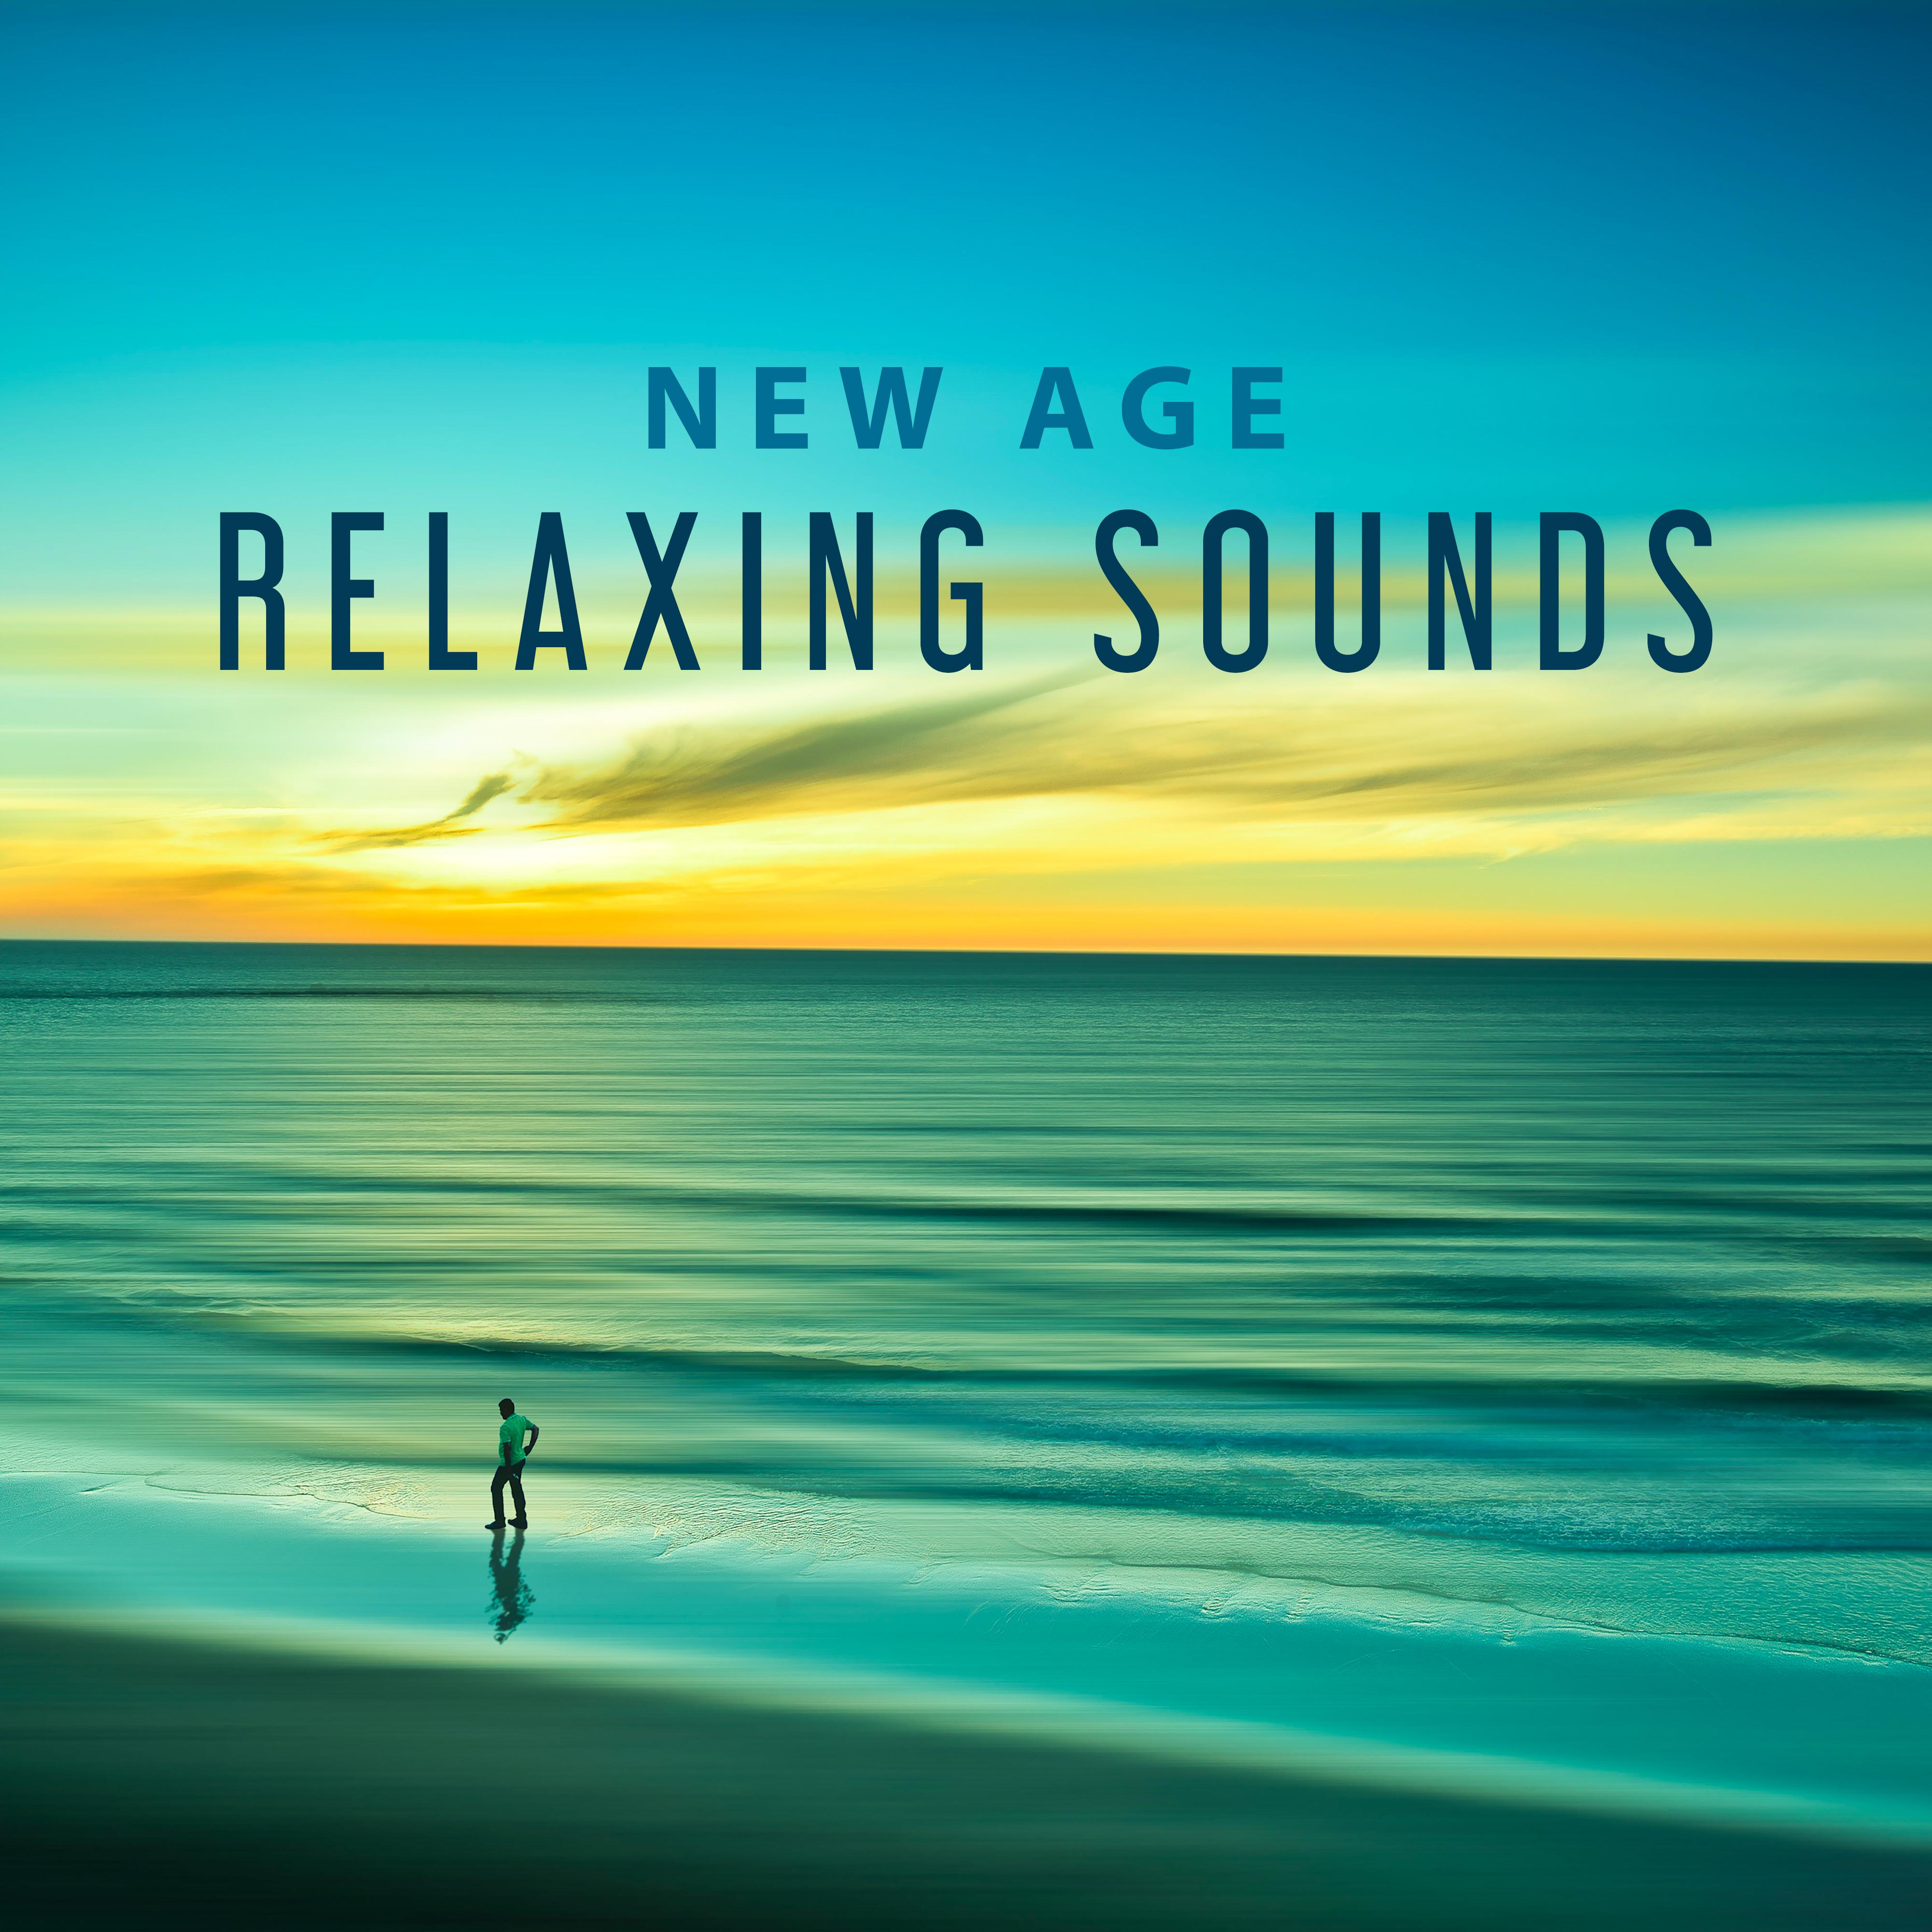 New Age Relaxing Sounds  Music to Calm Down, Peaceful Mind, Mind Calmness, Soothing Waves, Rest with New Age